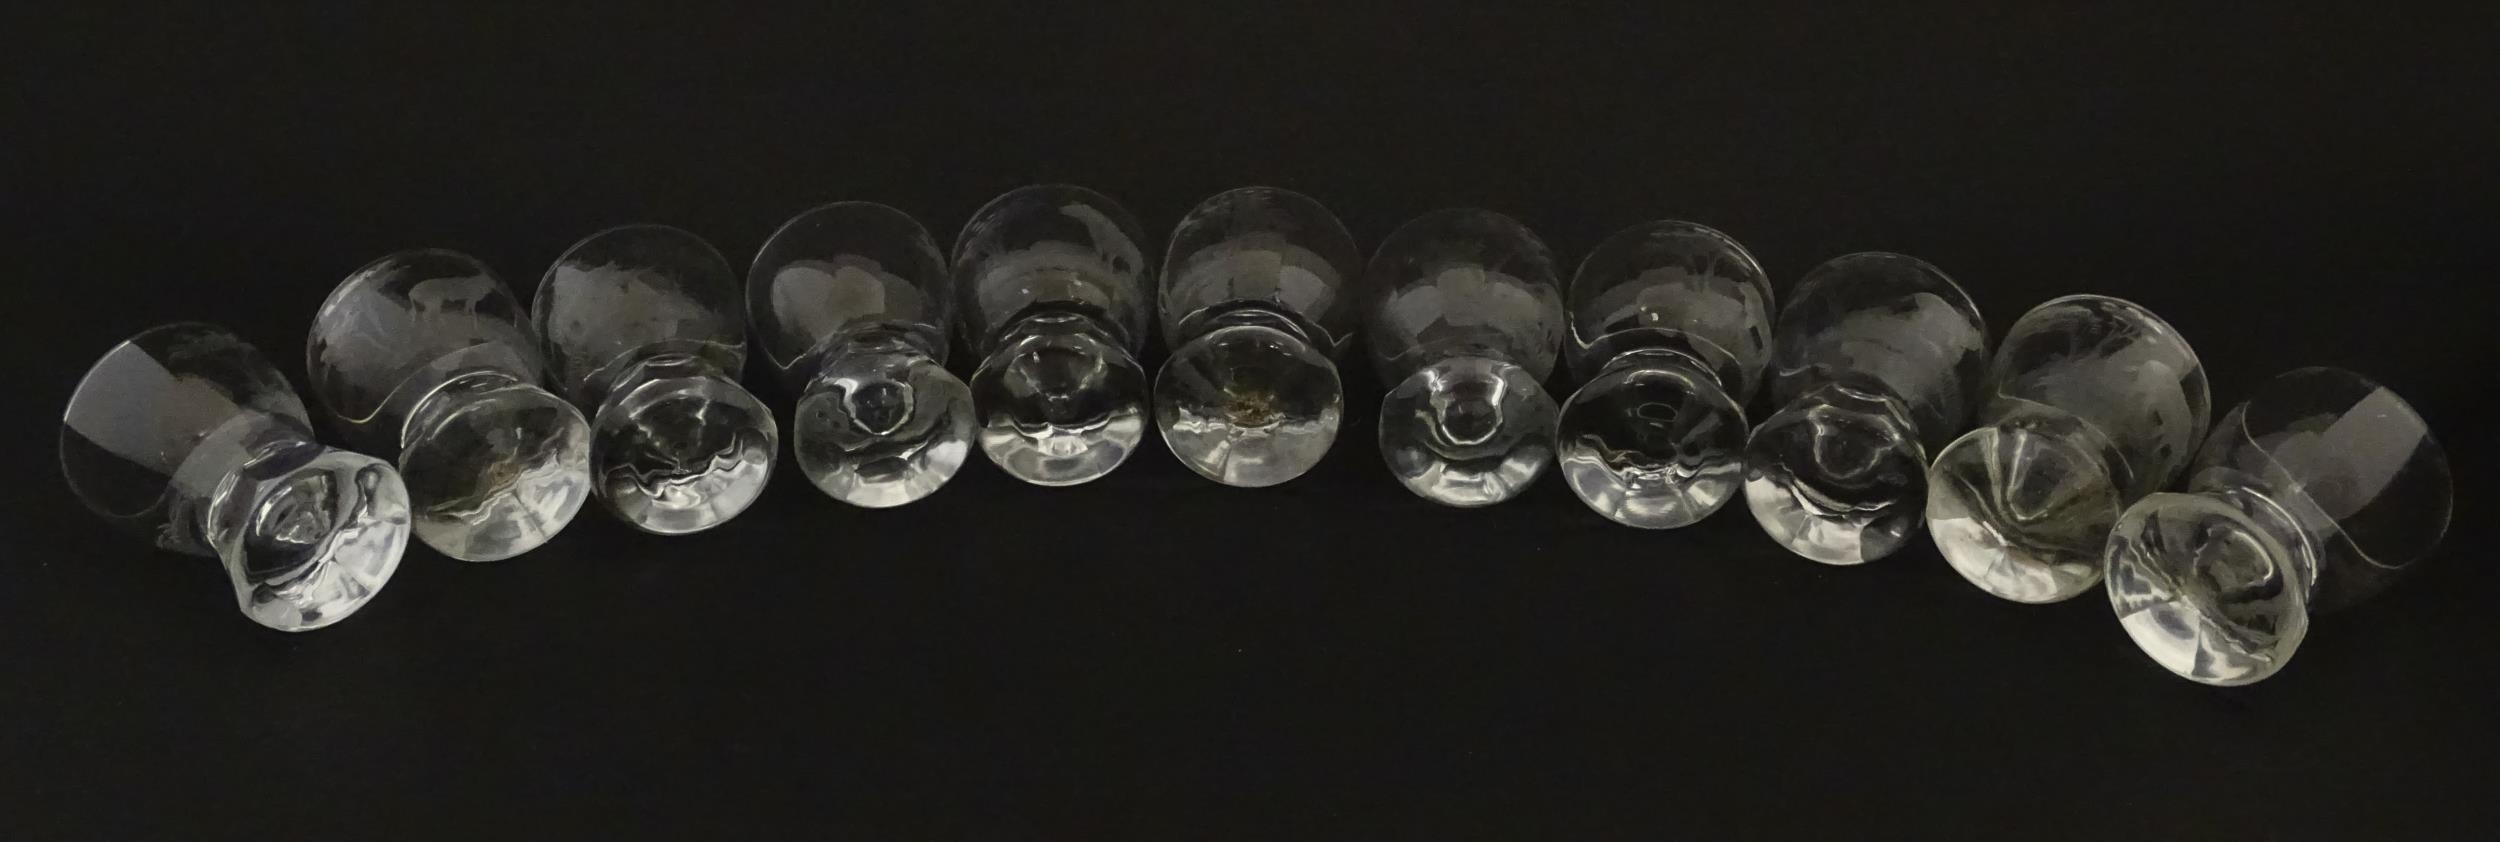 Rowland Ward sherry / liquor glasses with engraved Safari animal detail. Unsigned. Largest approx. - Image 4 of 26